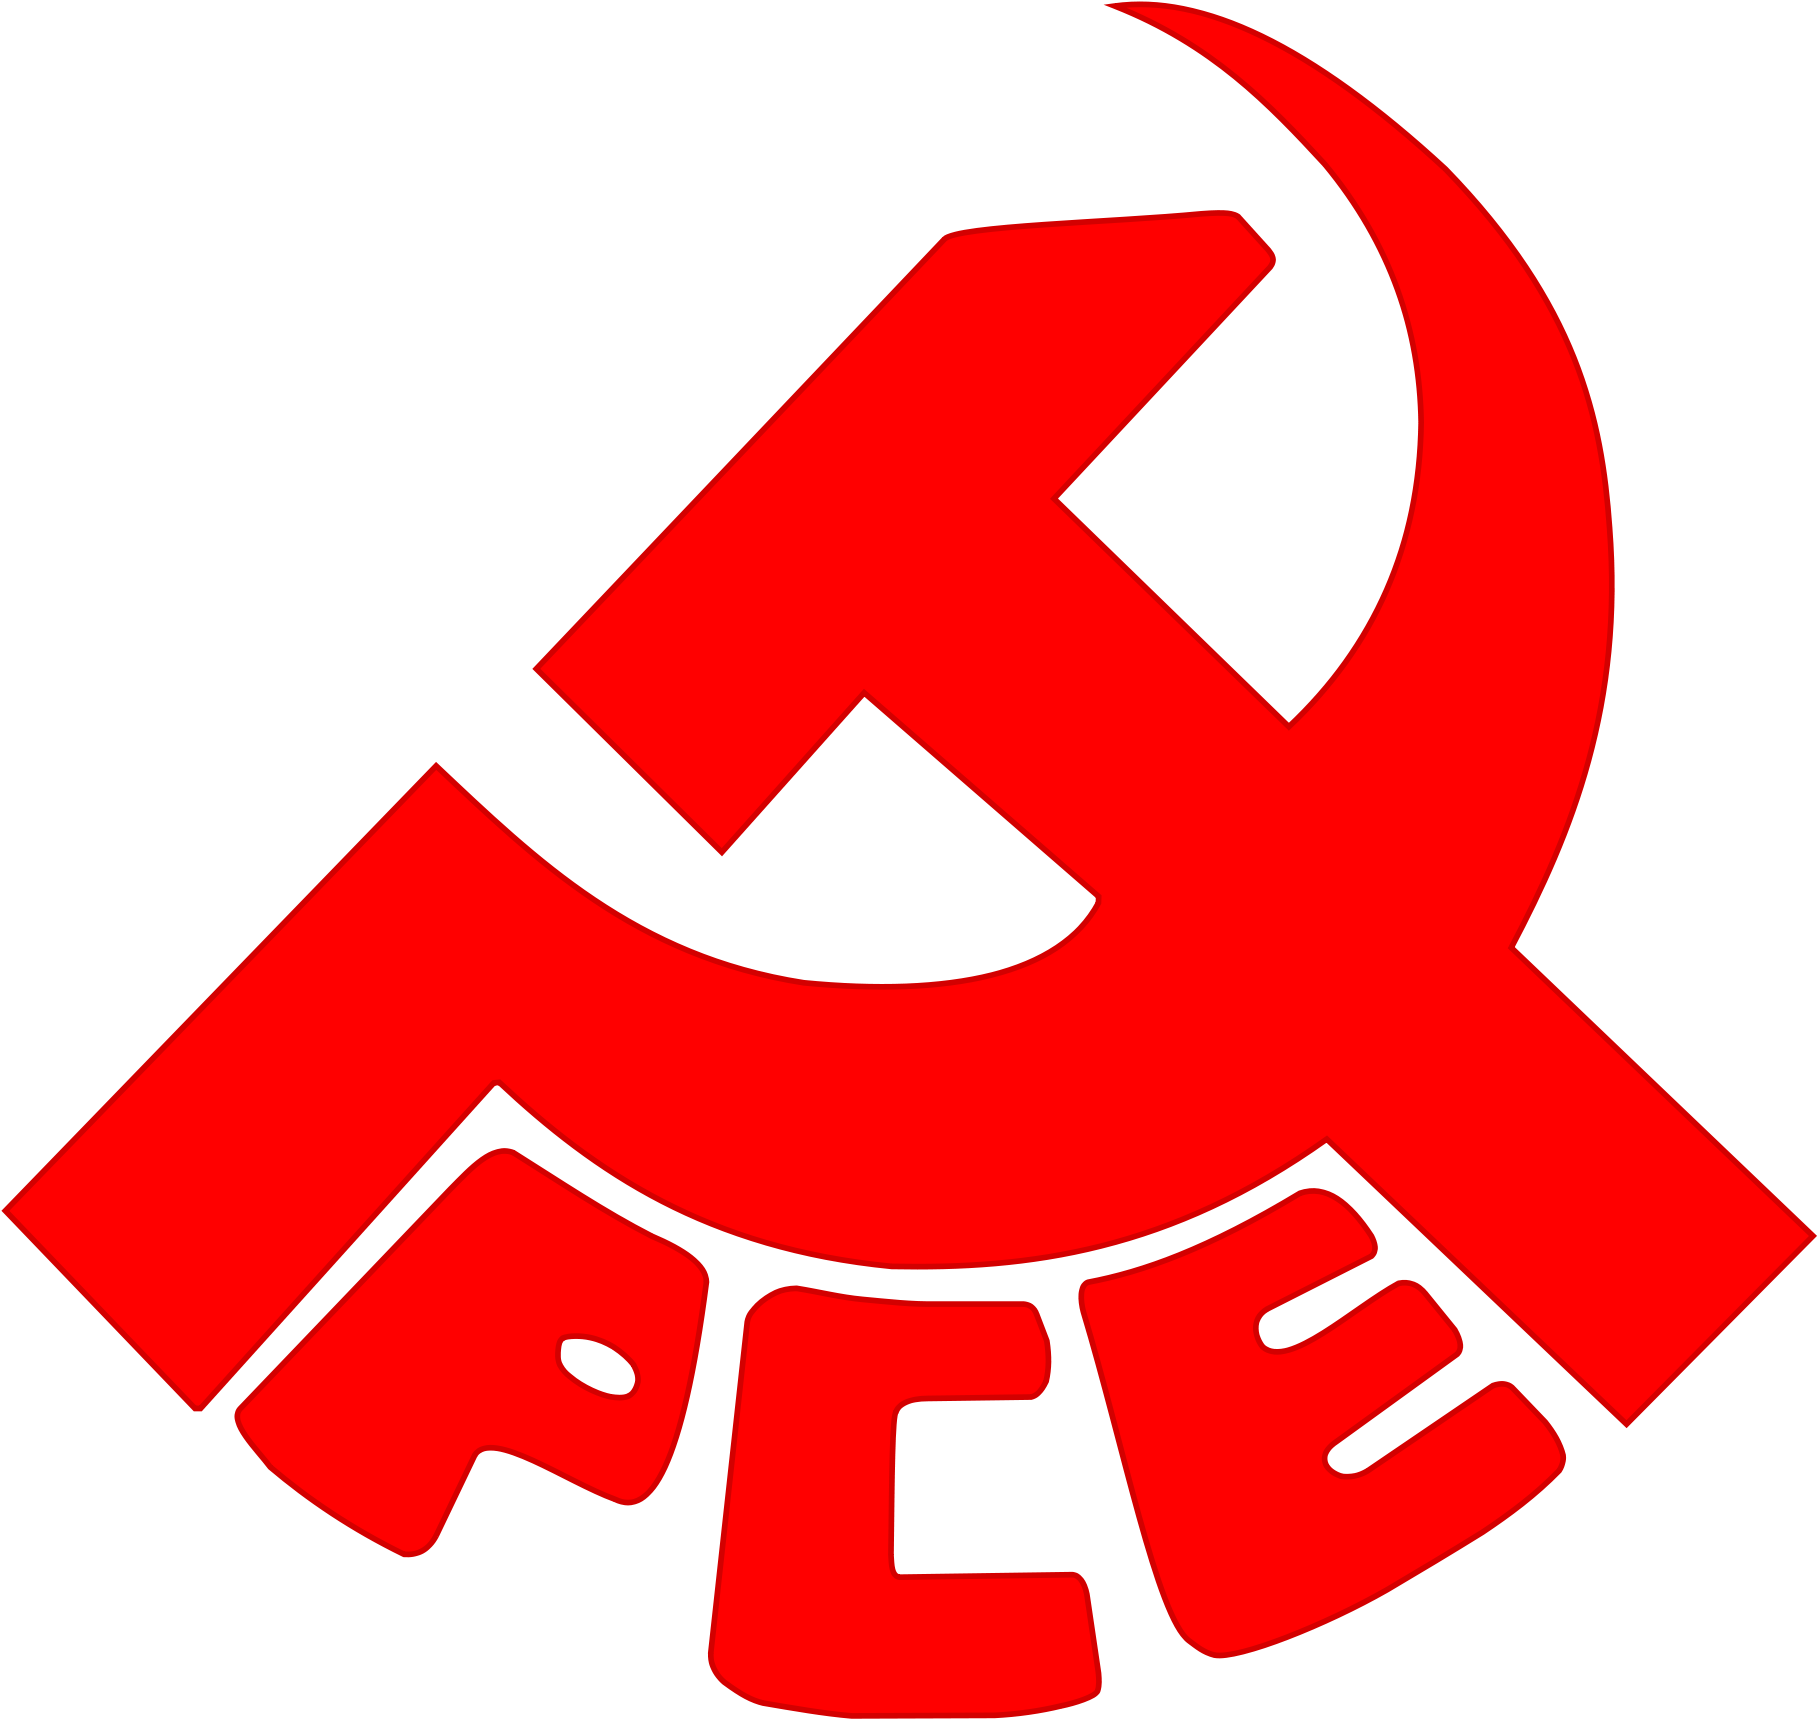 Front For The Liberation Of Palestine Received The - Pce Logo (2000x1909)